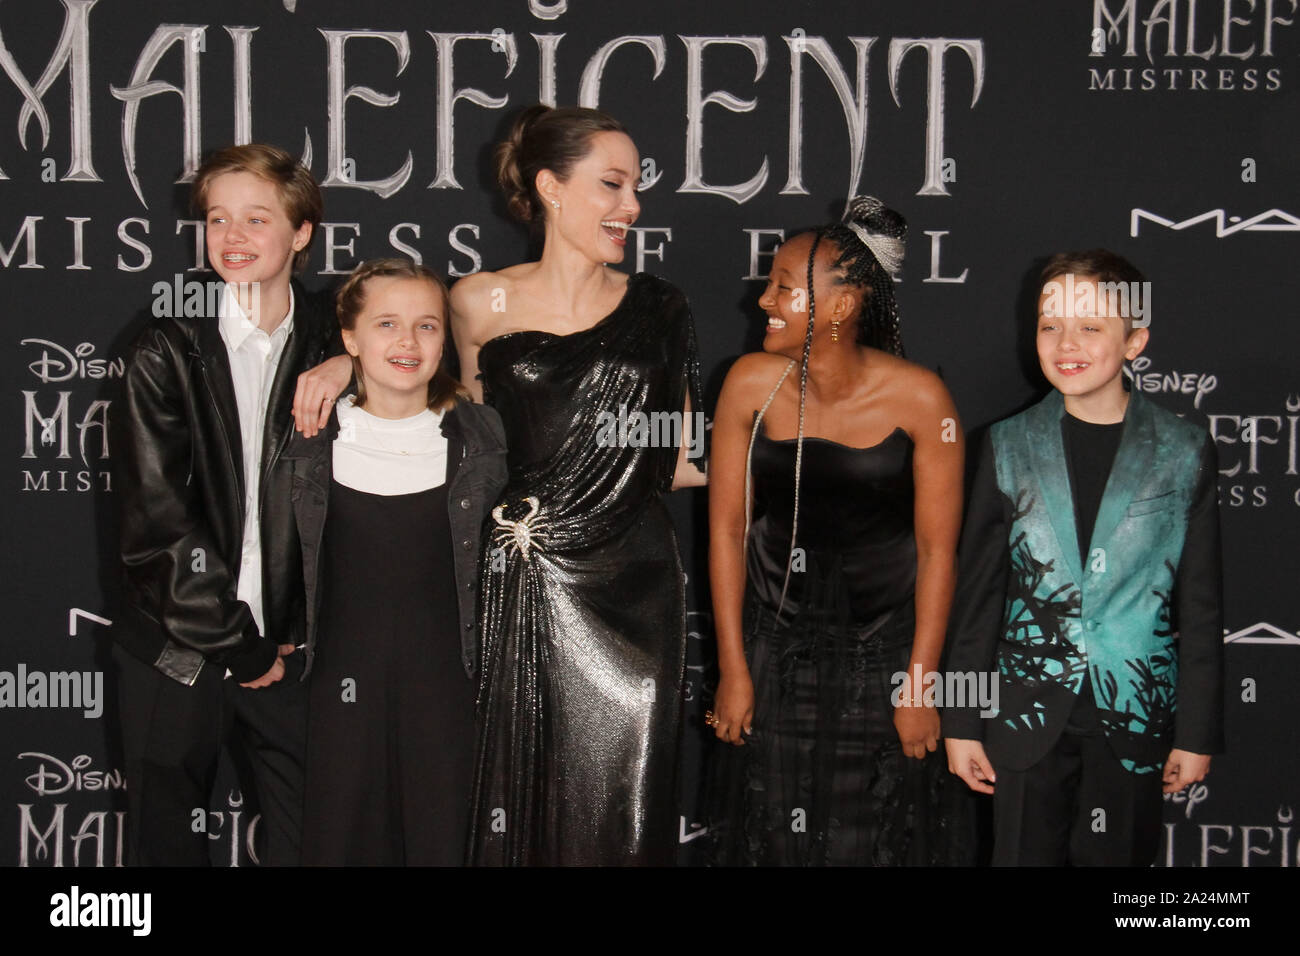 Los Angeles, USA. 30th Sep, 2019. Shiloh Jolie Pitt, Vivienne Jolie Pitt, Angelina Jolie, Zahara Jolie Pitt, Knox Jolie Pitt at Disney's 'Maleficent: Mistress of Evil' World Premiere held at El Capitan Theater in Los Angeles, CA, September 30, 2019. Photo Credit: Joseph Martinez/PictureLux - All Rights Reserved Credit: PictureLux/The Hollywood Archive/Alamy Live News Stock Photo